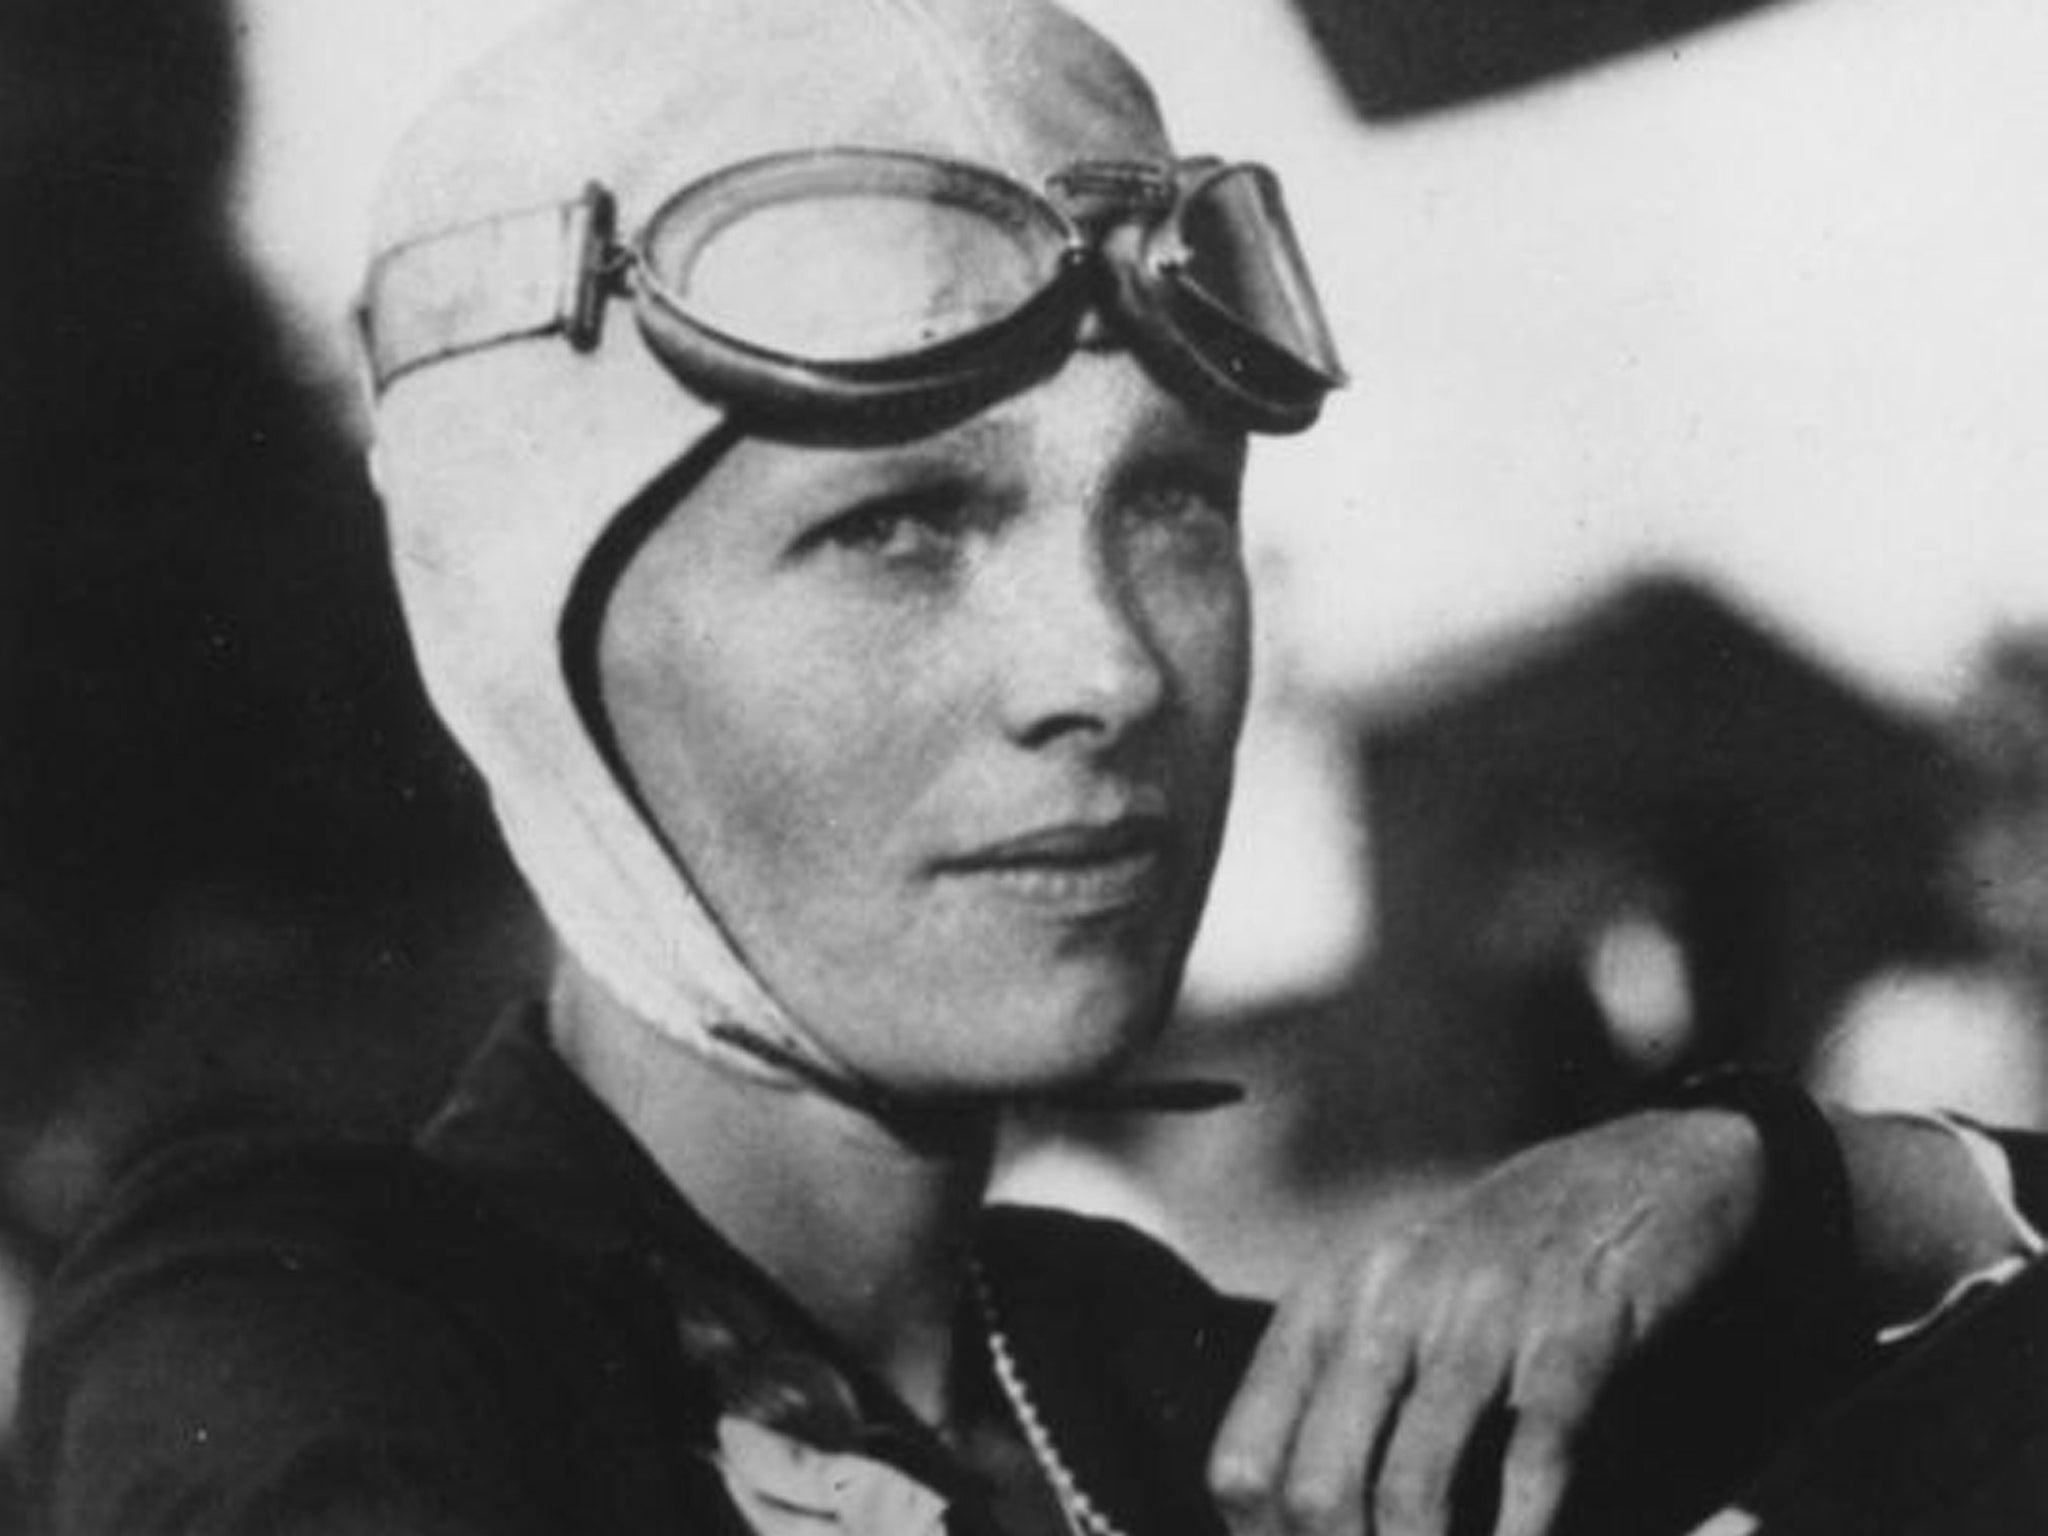 An undated file photo shows Amelia Earhart, the first woman to fly solo across the Atlantic Ocean (AP)